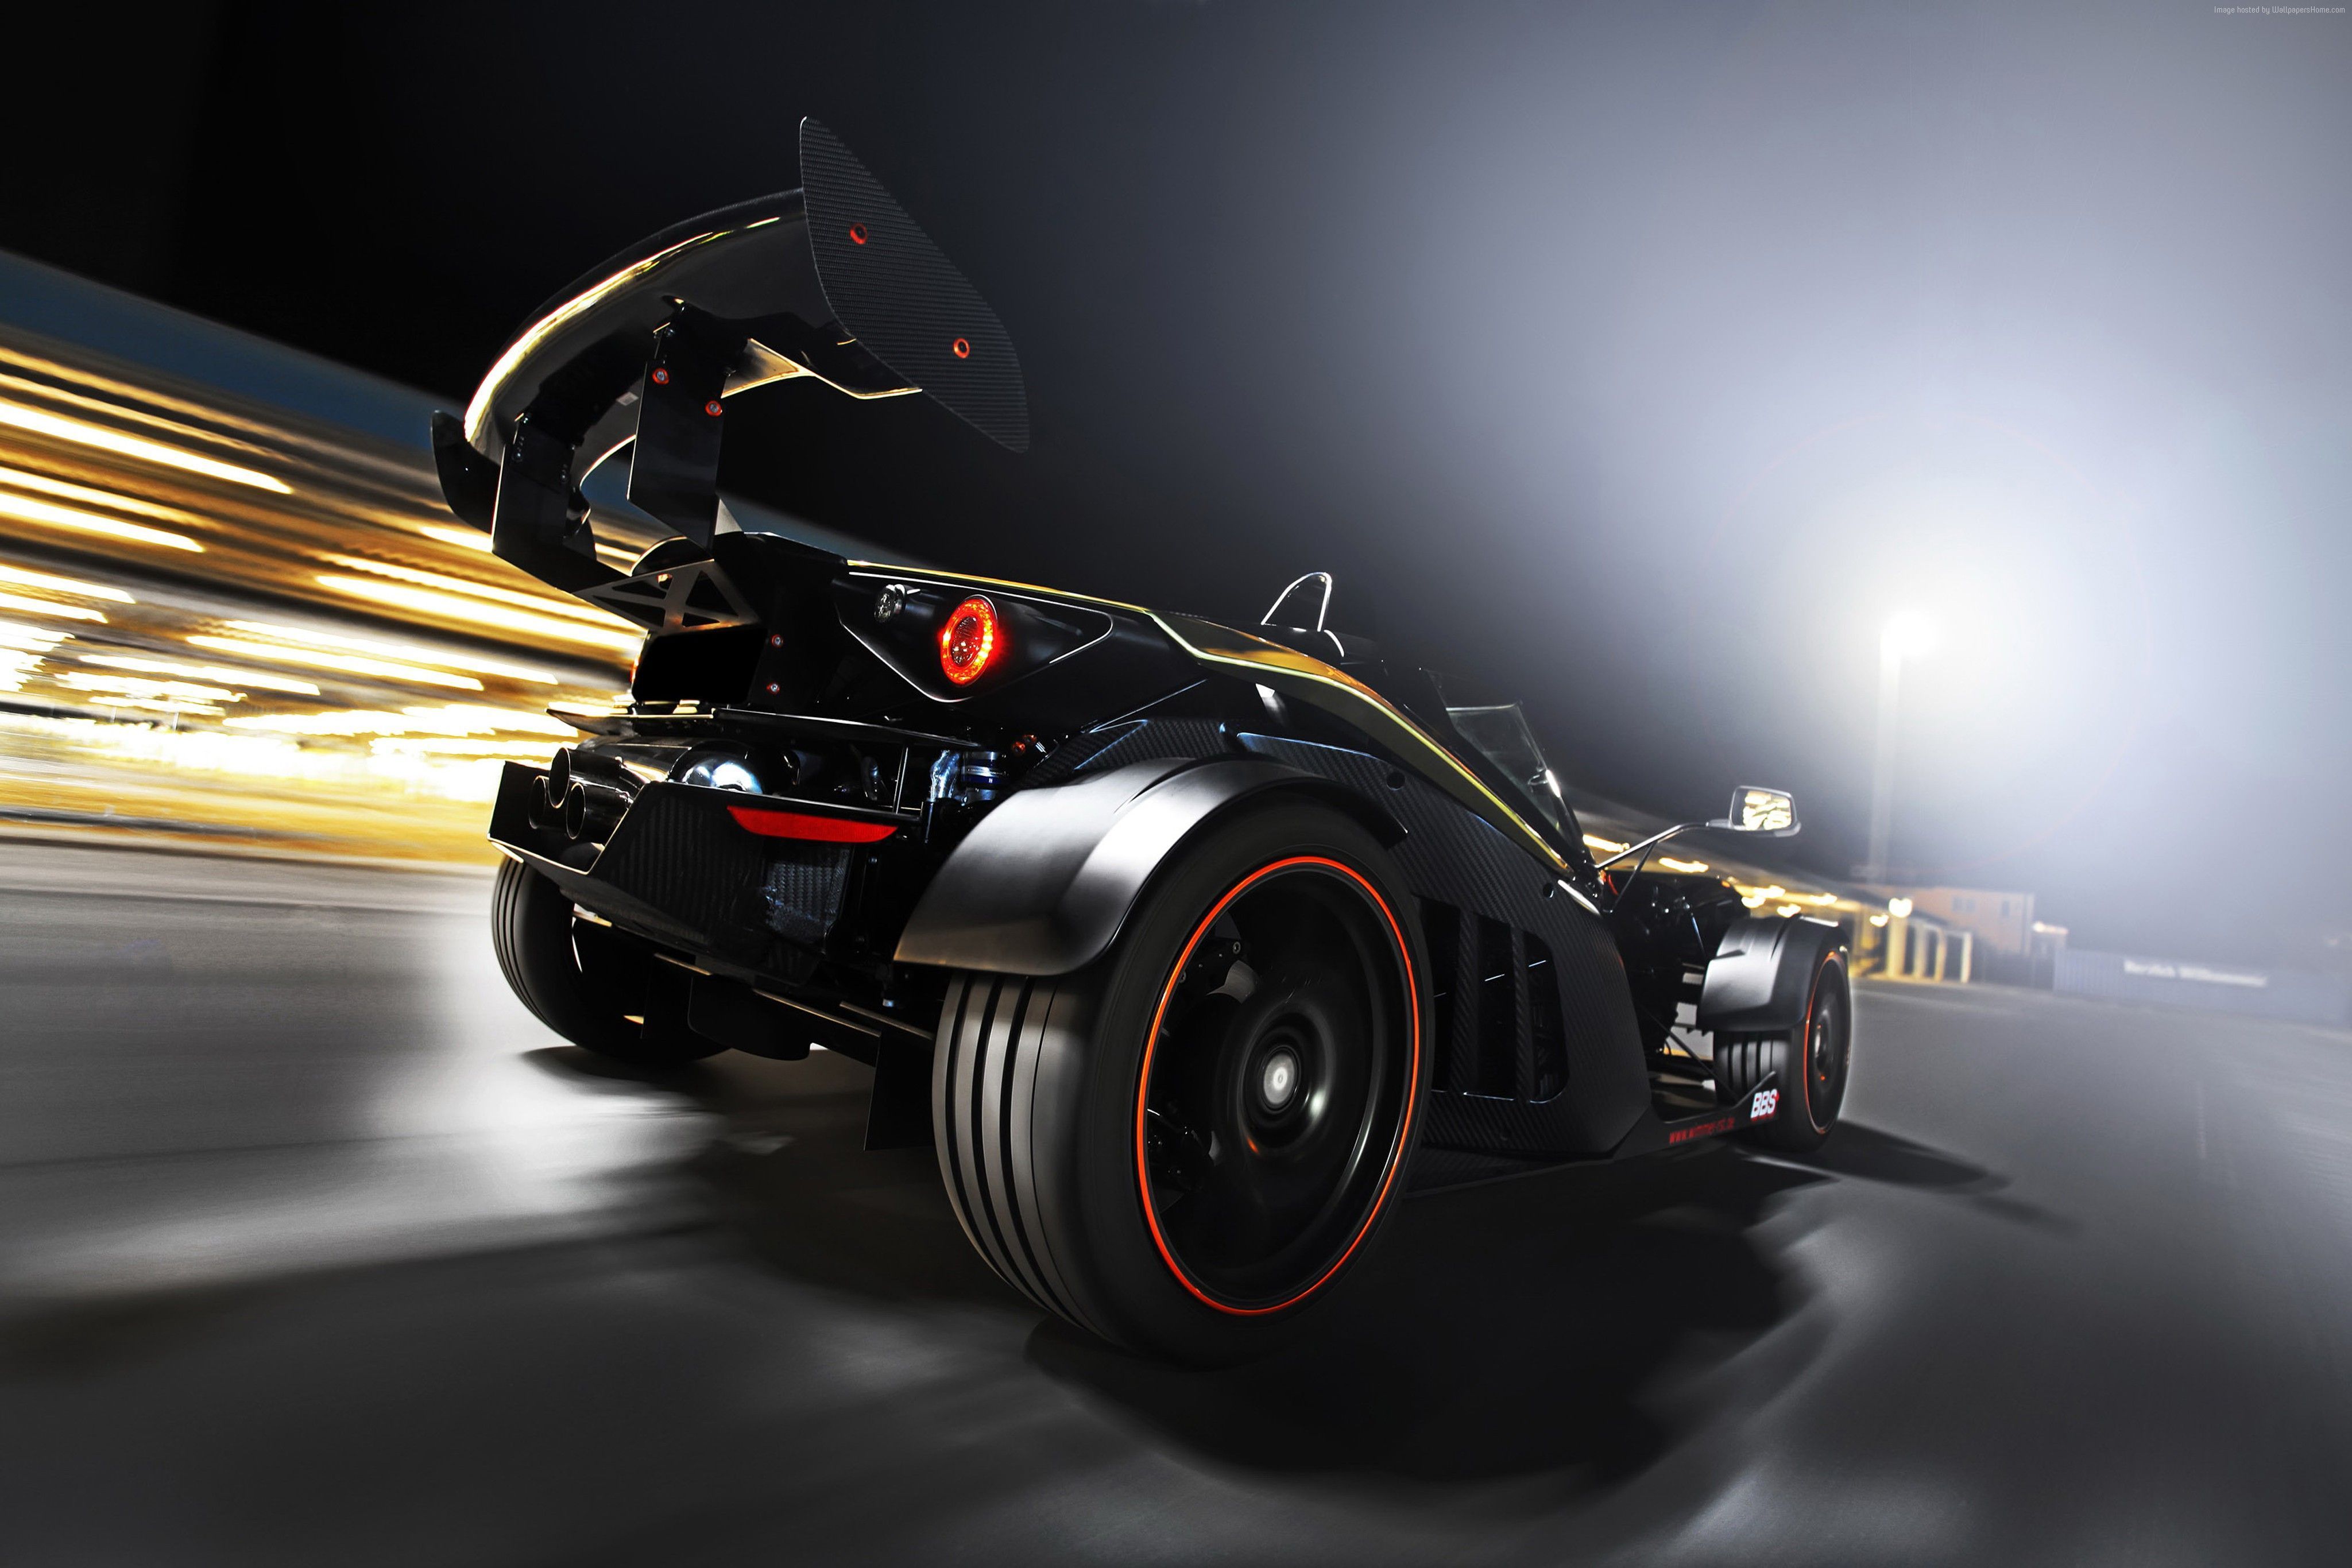 Wimmer RS Wallpaper, Cars & Bikes / Recent: Wimmer RS, KTM X-Bow ...